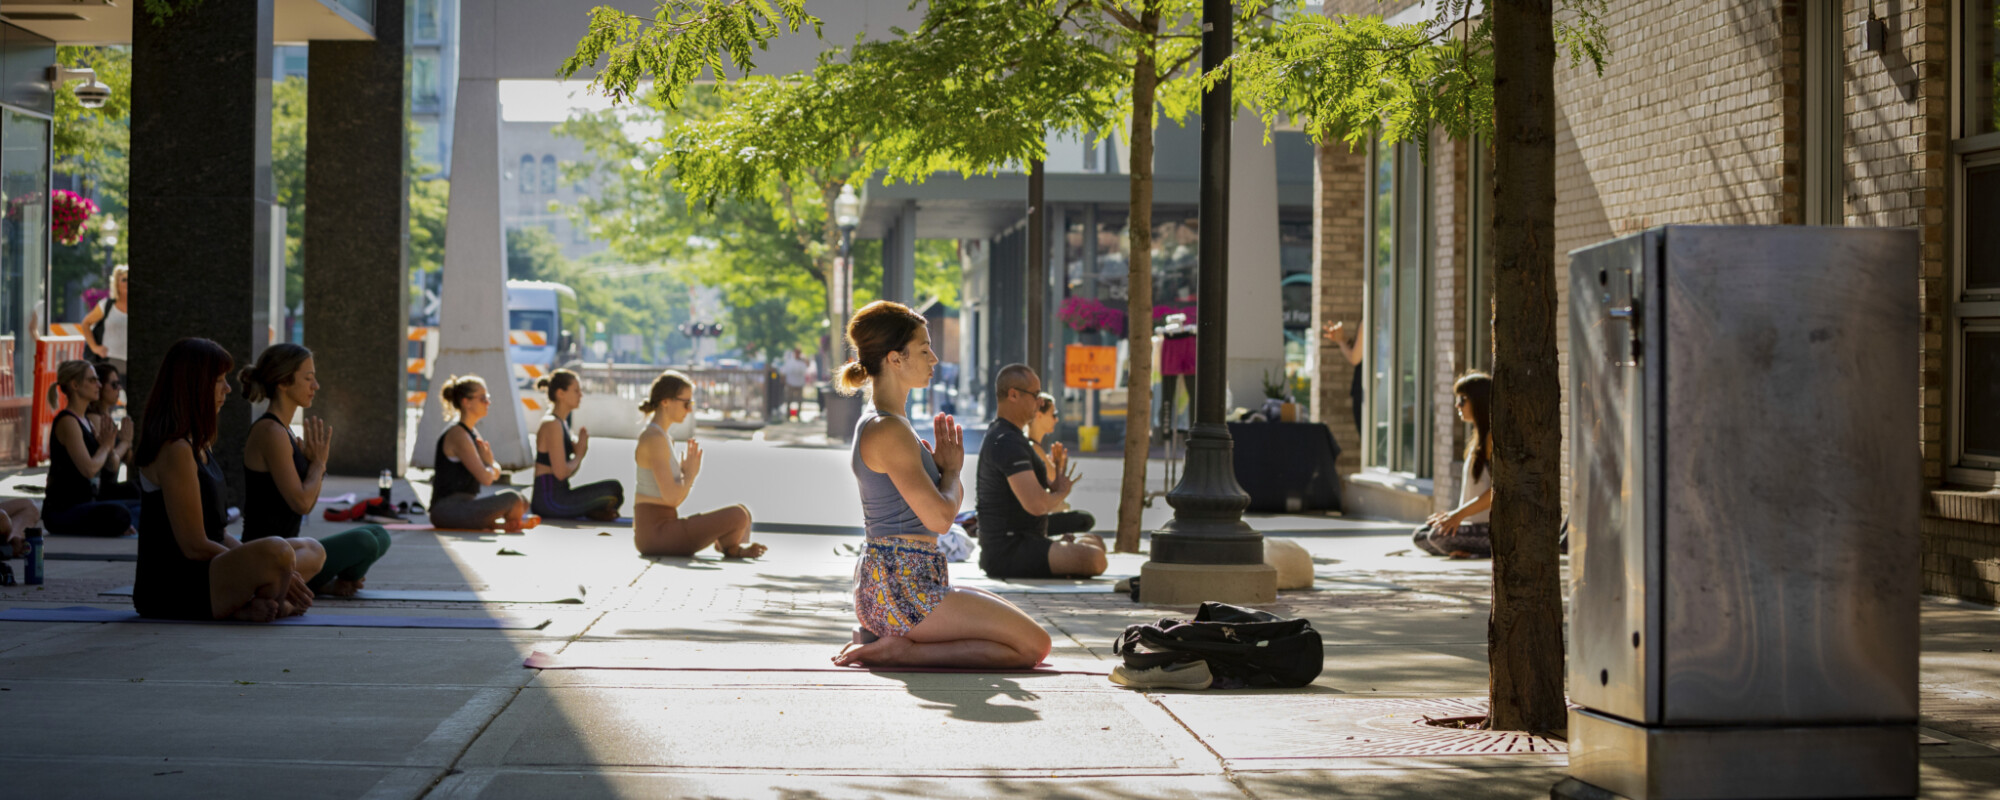 People practicing yoga in an outdoor plaza.